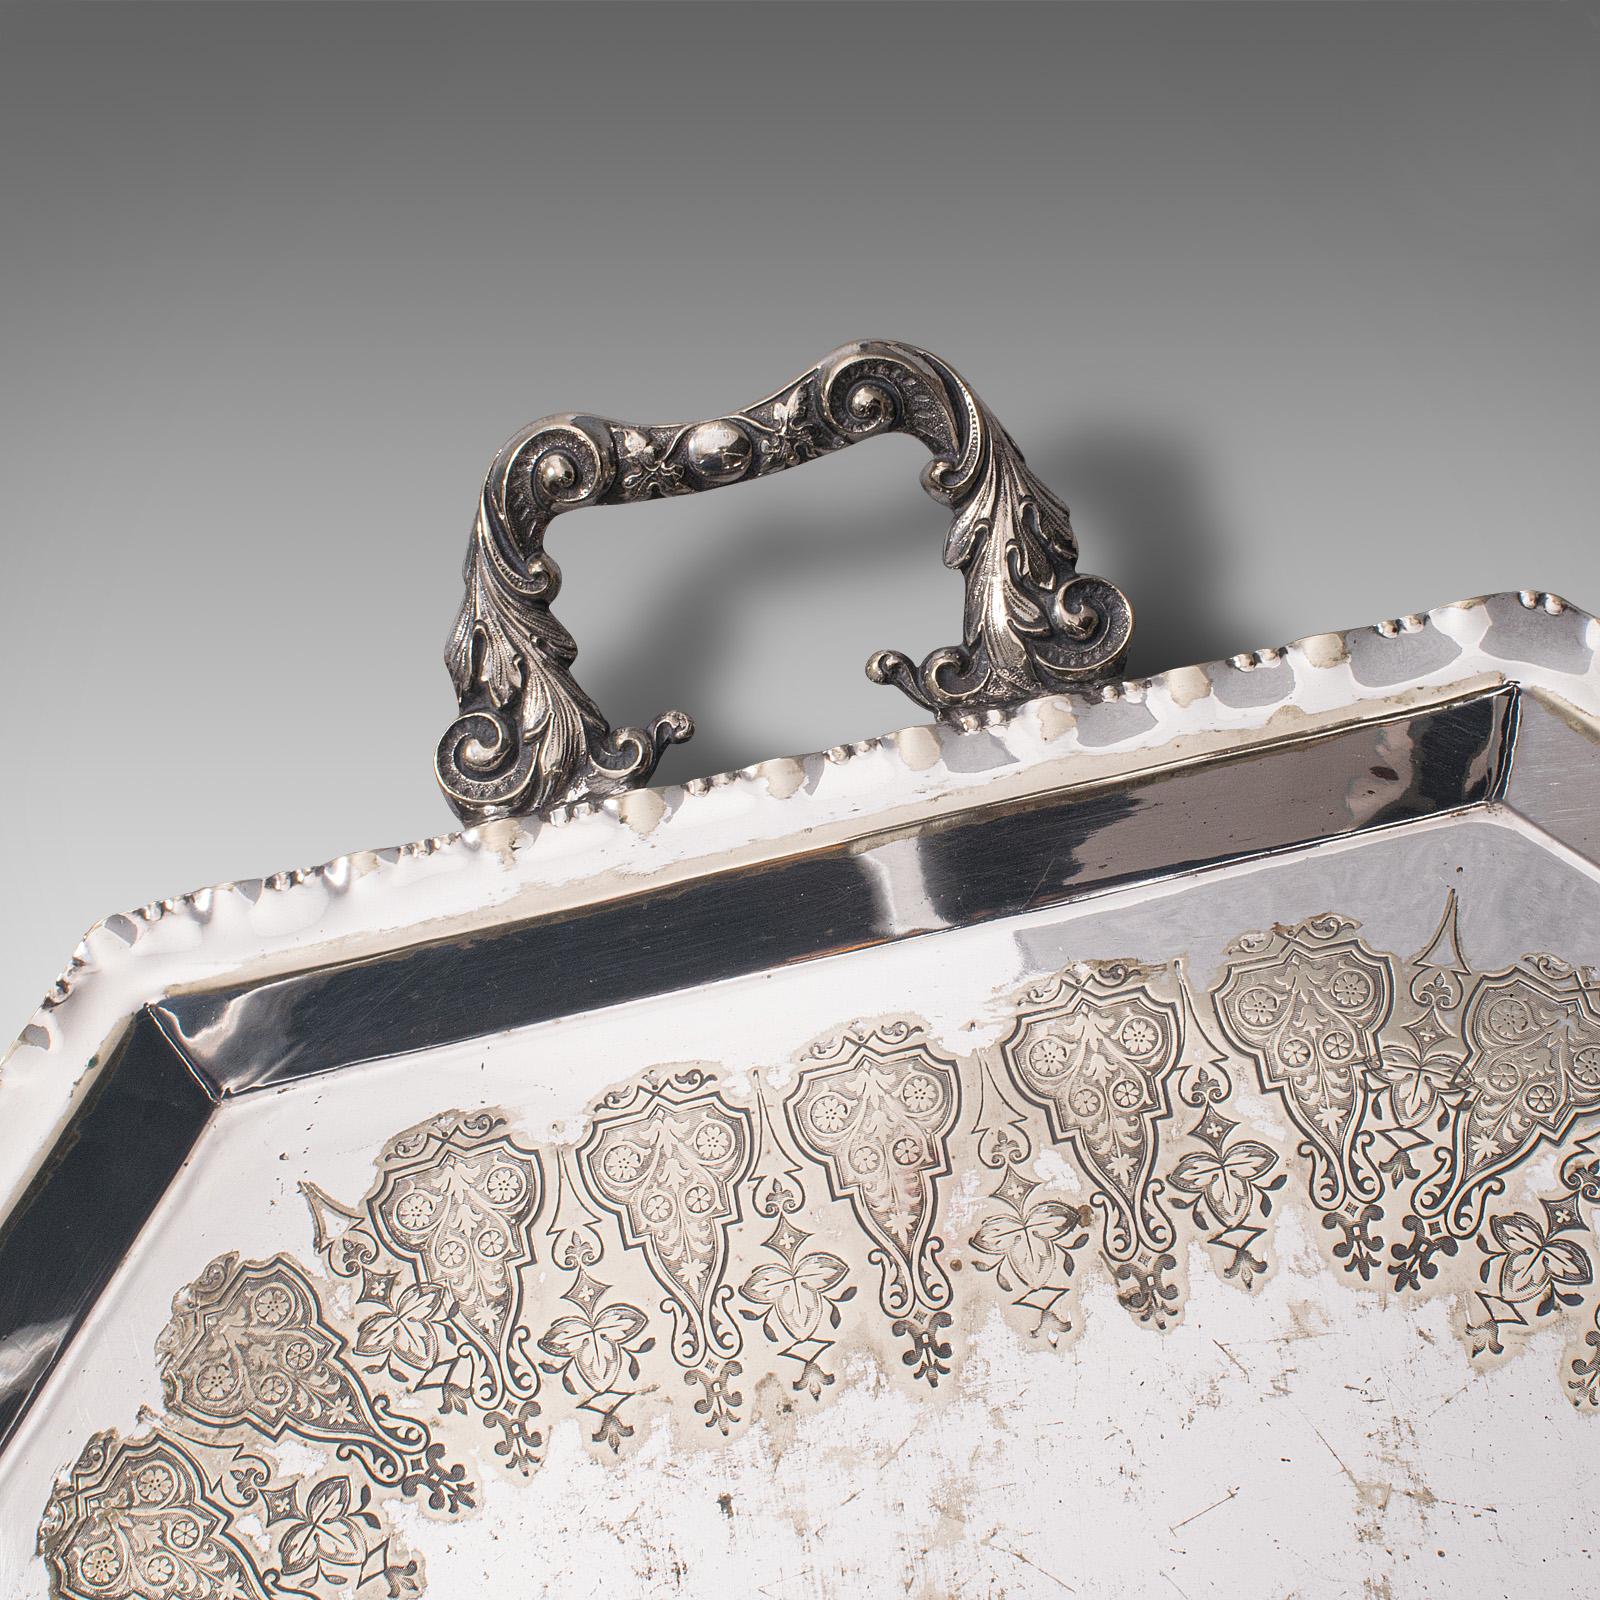 Antique Presentation Serving Tray, English, Silver Plated, Afternoon Tea, C.1895 For Sale 2